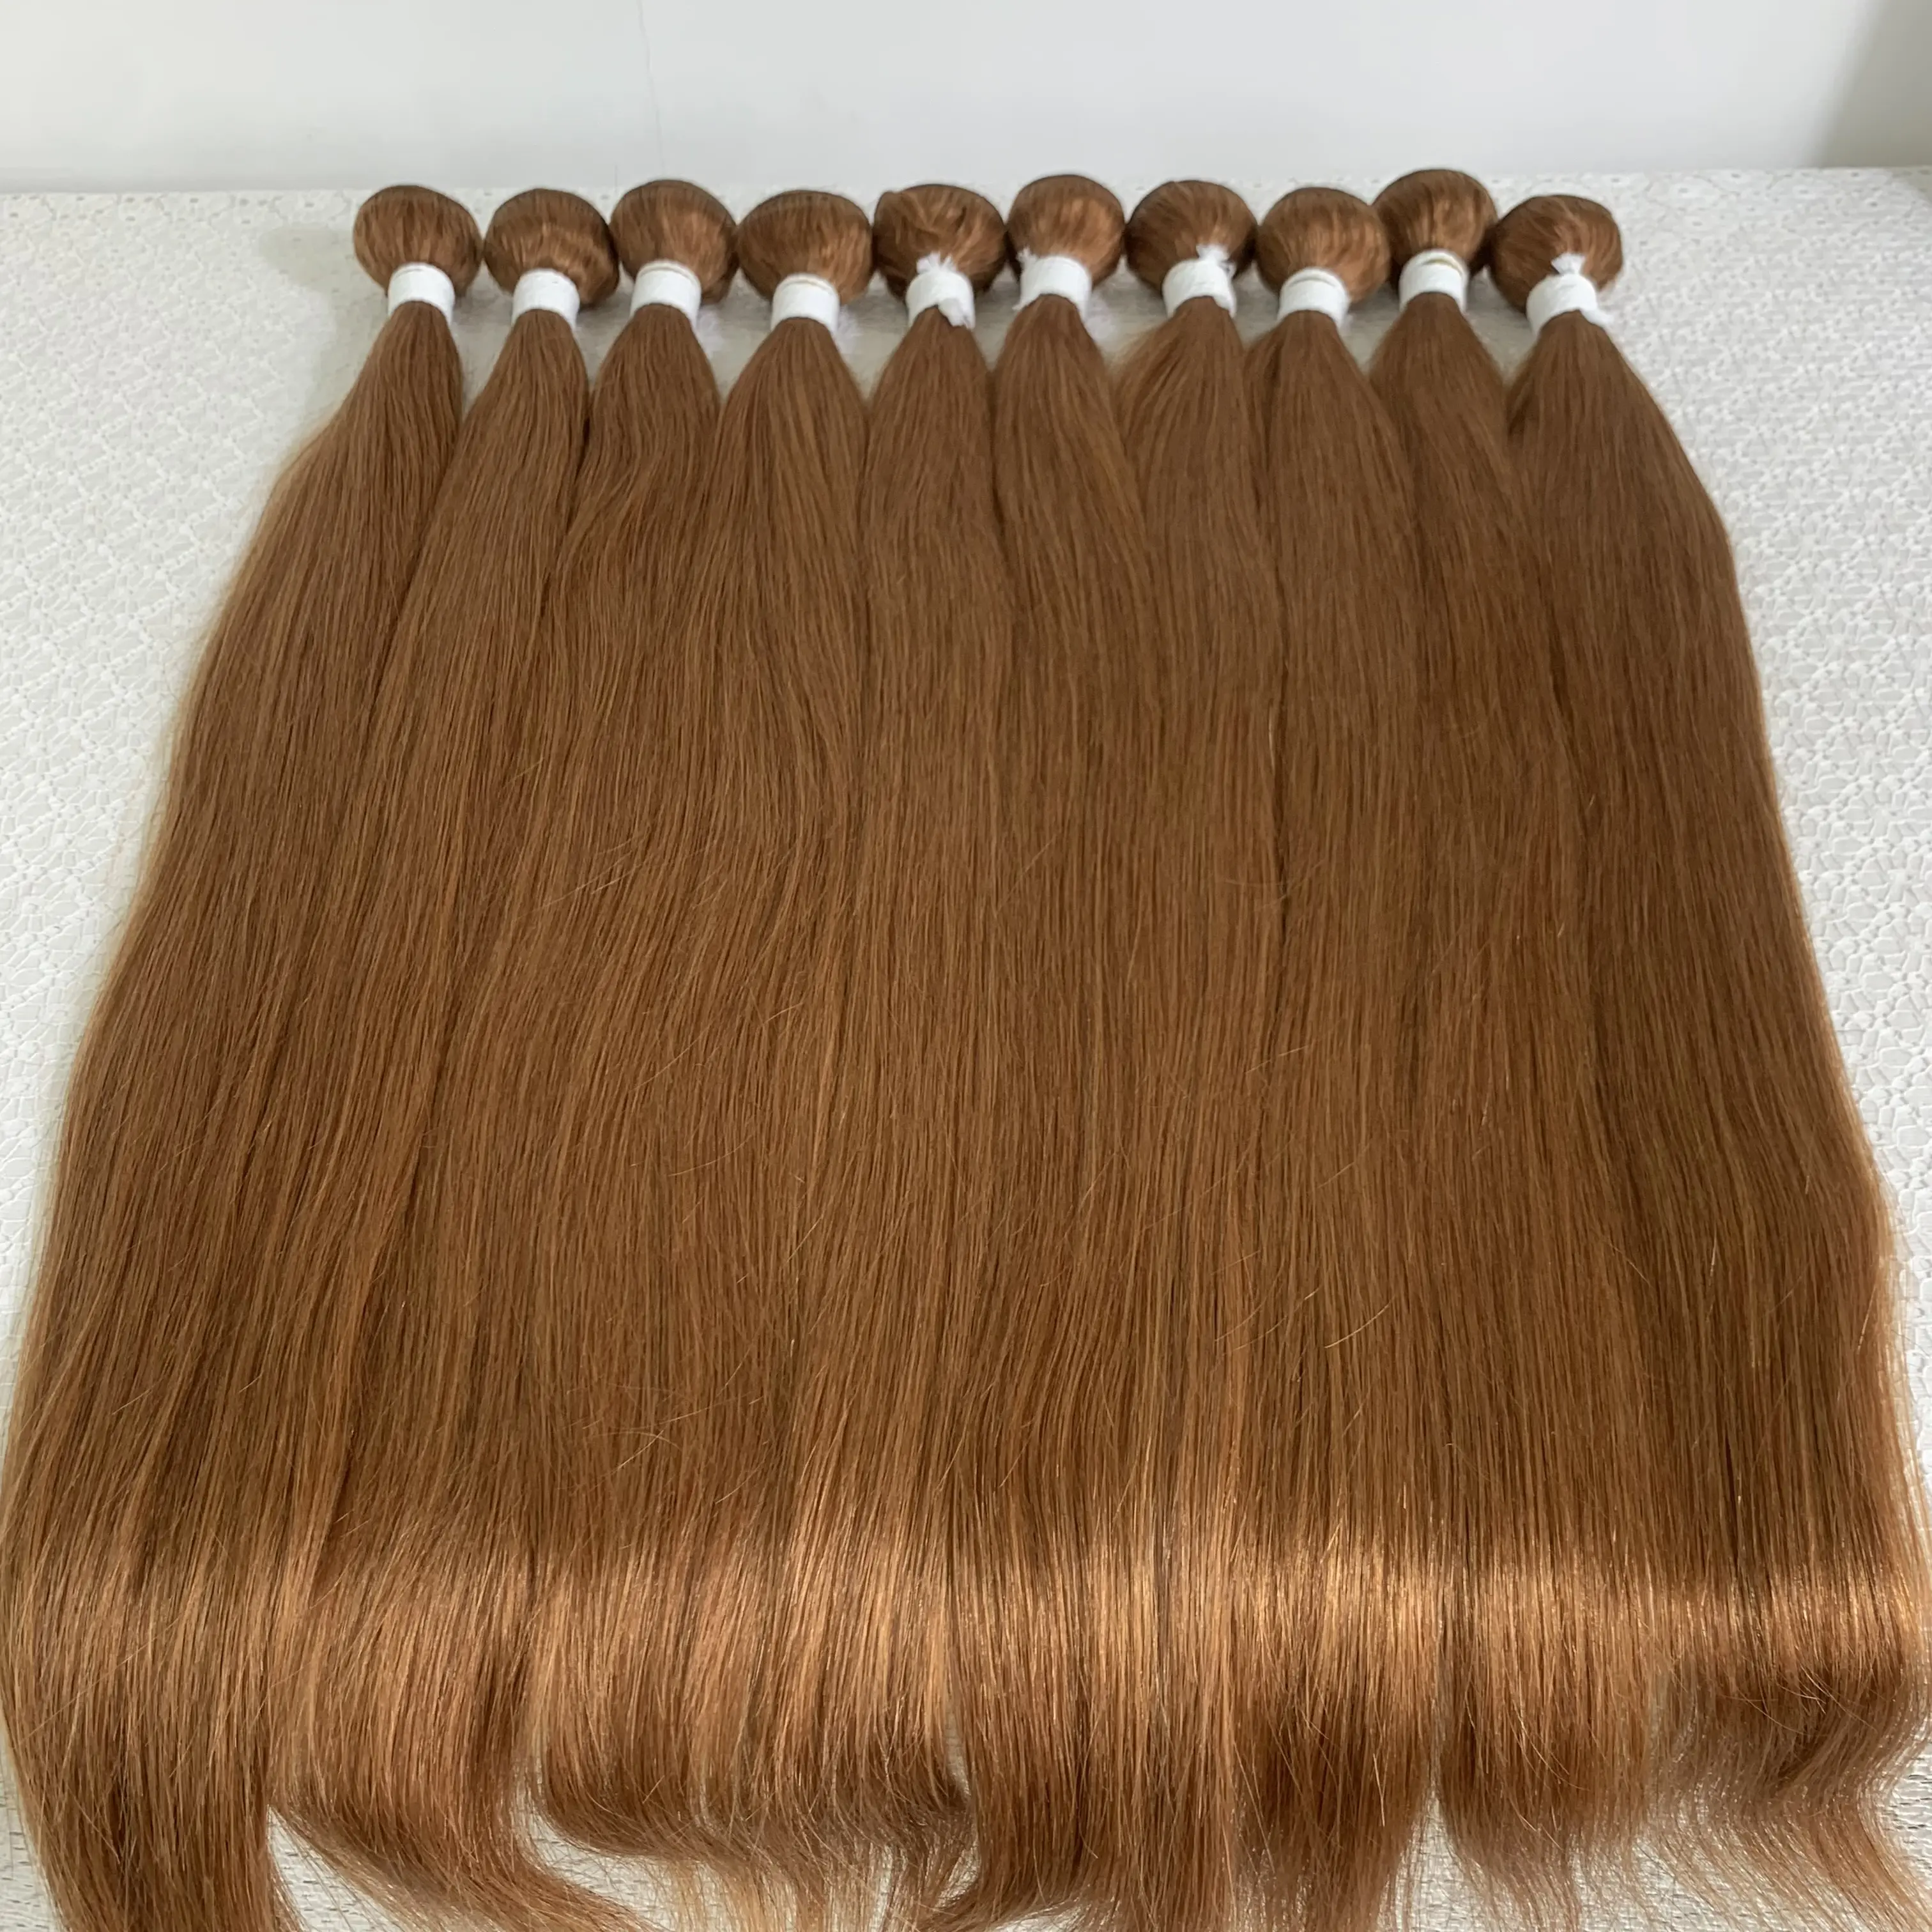 RUIMEI Brazilian Brown Kinky Curly Hair Bundles With Closure 4X4 Human Hair Weave Bundles With Closure Remy Hair Extension